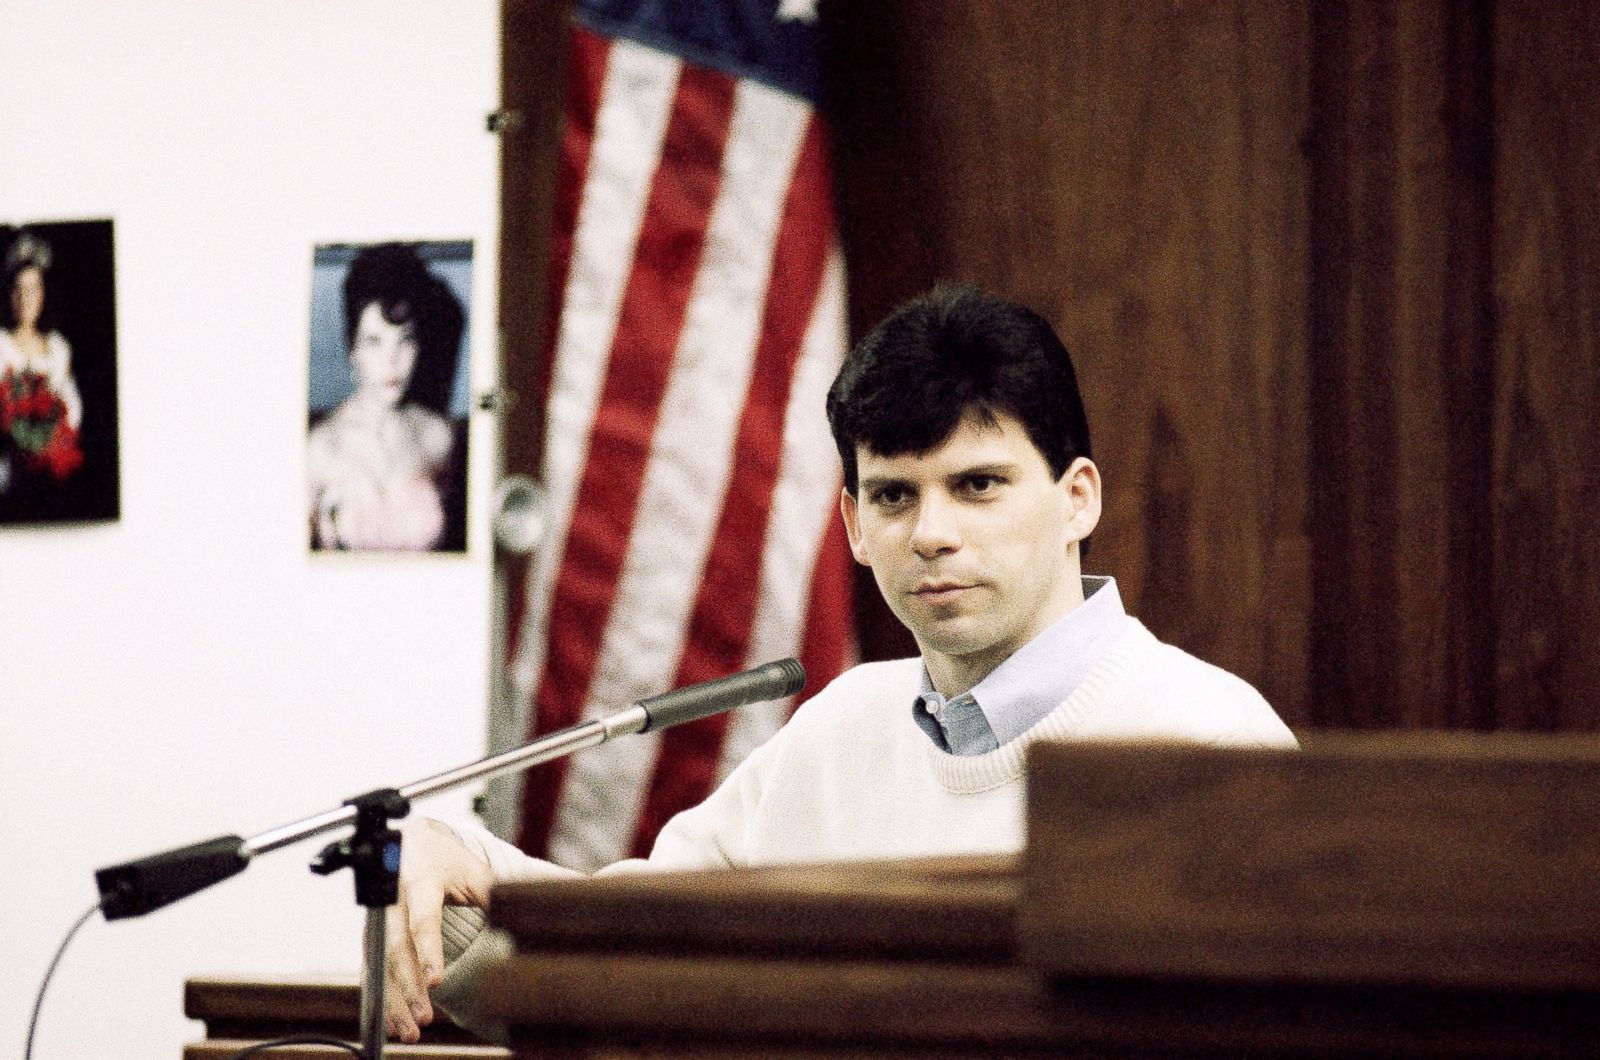 The Menendez brothers: A look at their childhood the murder the trial